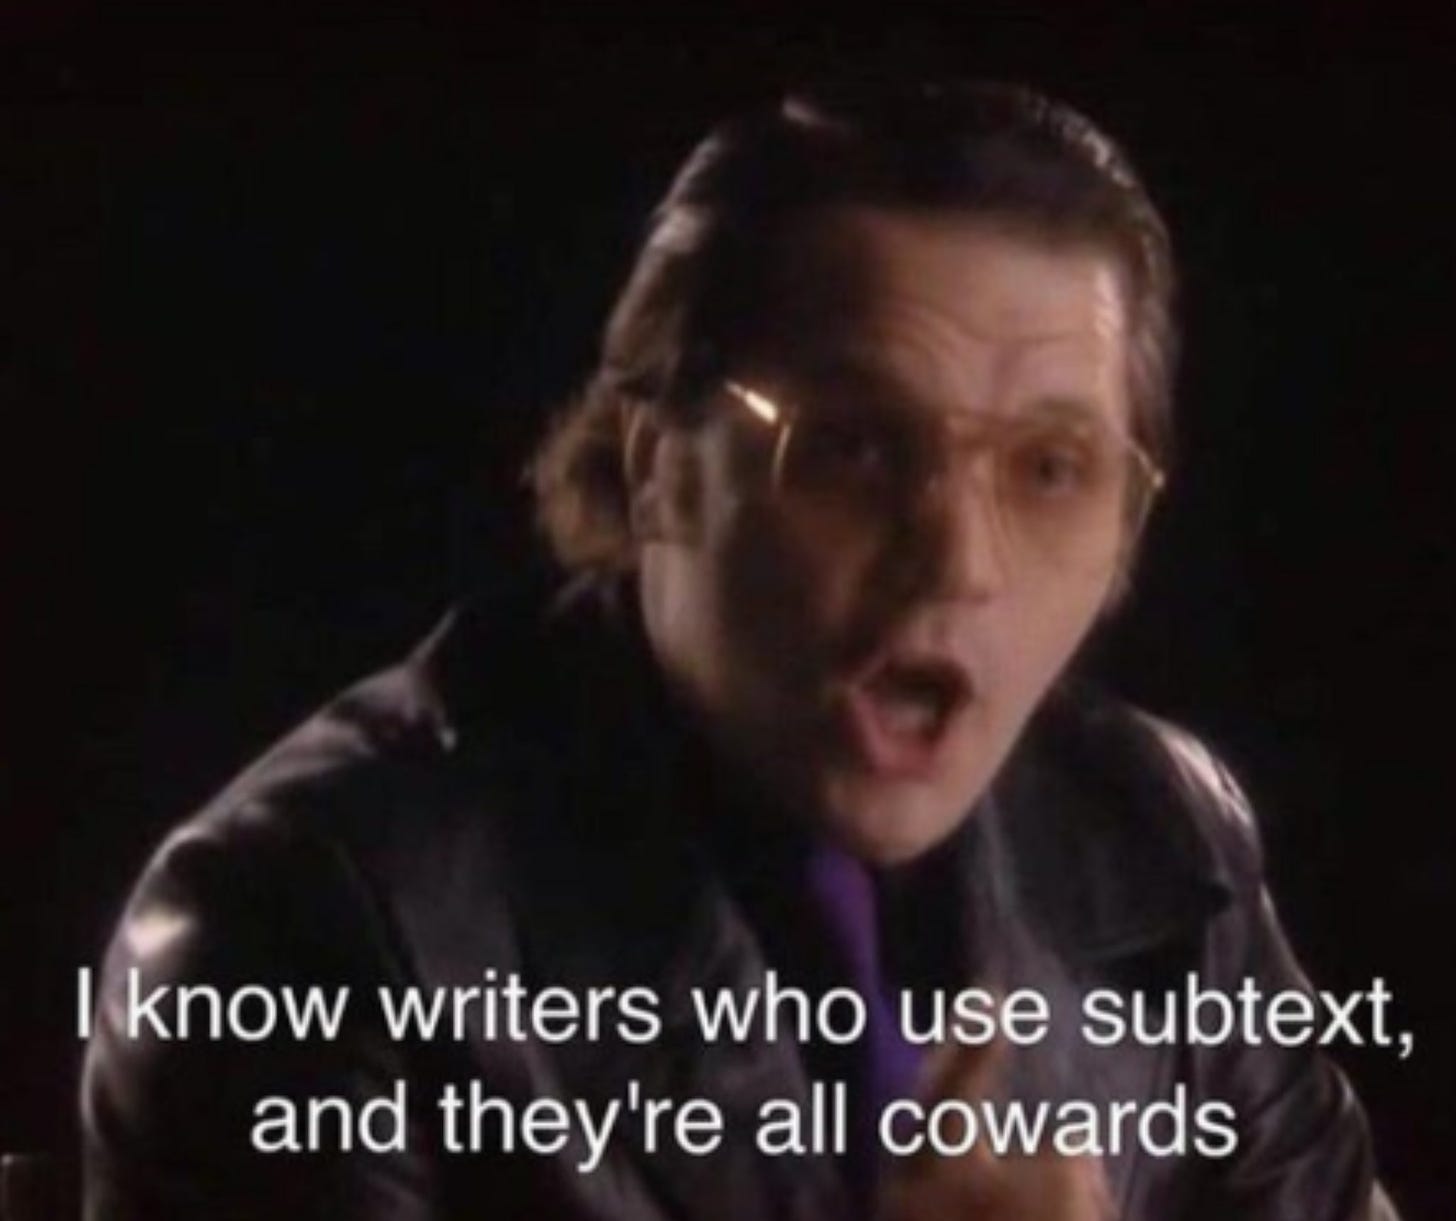 "I know writers who use subtext and they're all cowards."